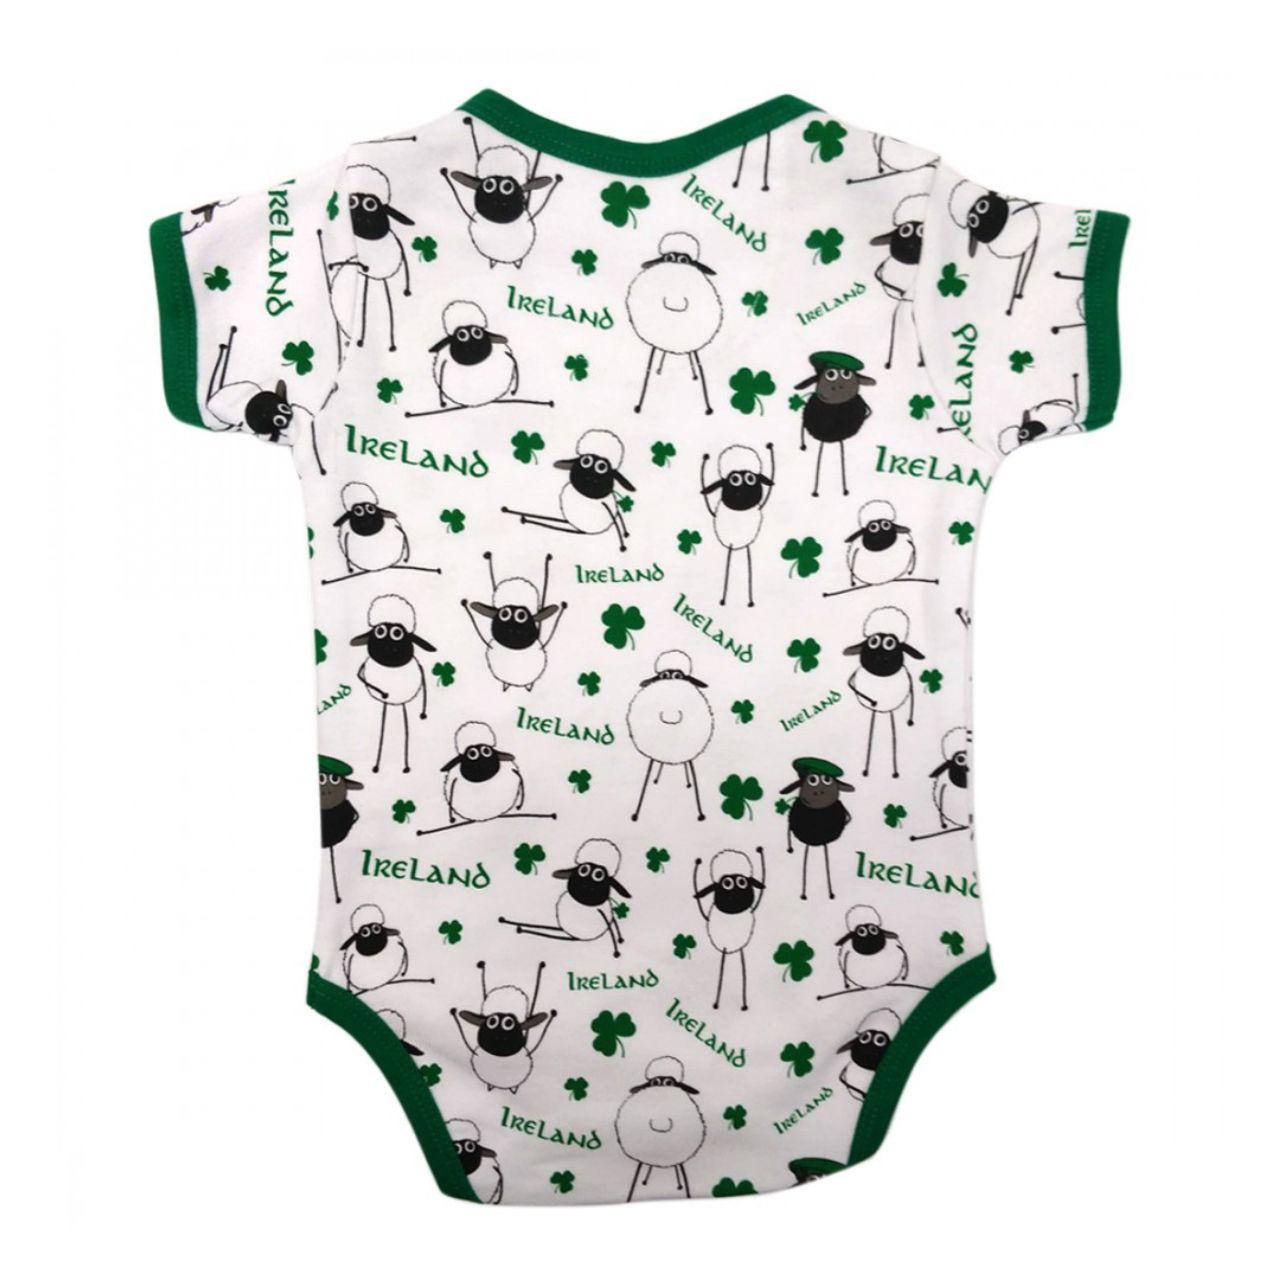 White & Green Overall Printed Sheep Baby Vest  This white and green baby vest is part of the Traditional Craft Official Collection. This white cotton vest has an emerald green trim on the neck, sleeves and bottom. The vest is designed with an over all print of sheep, shamrocks & Ireland logo's from the Flaherty Flock range.